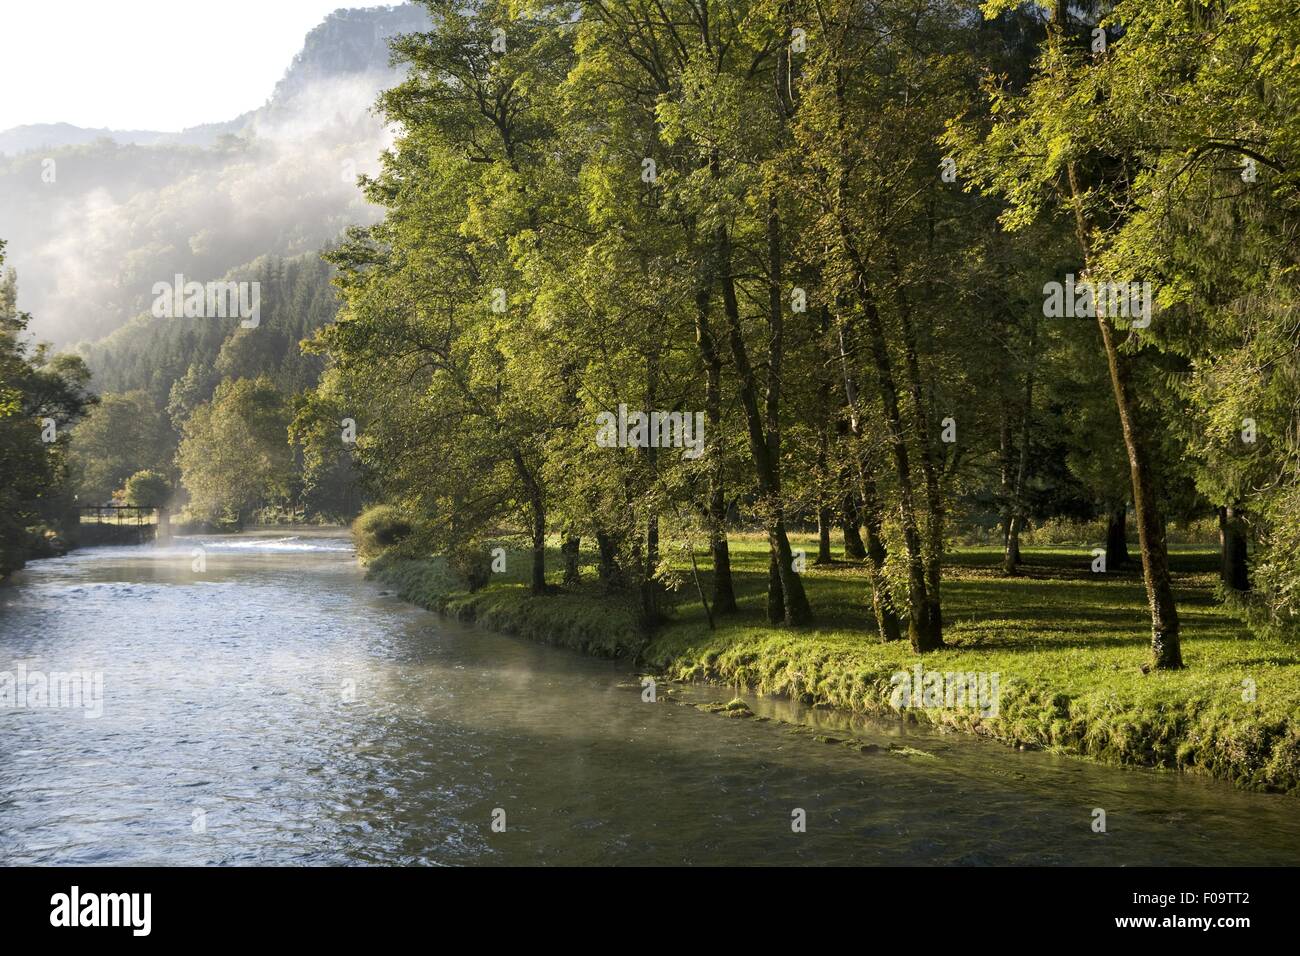 View of Loue river with fog near the village of Lods, Franche-Comte, France Stock Photo